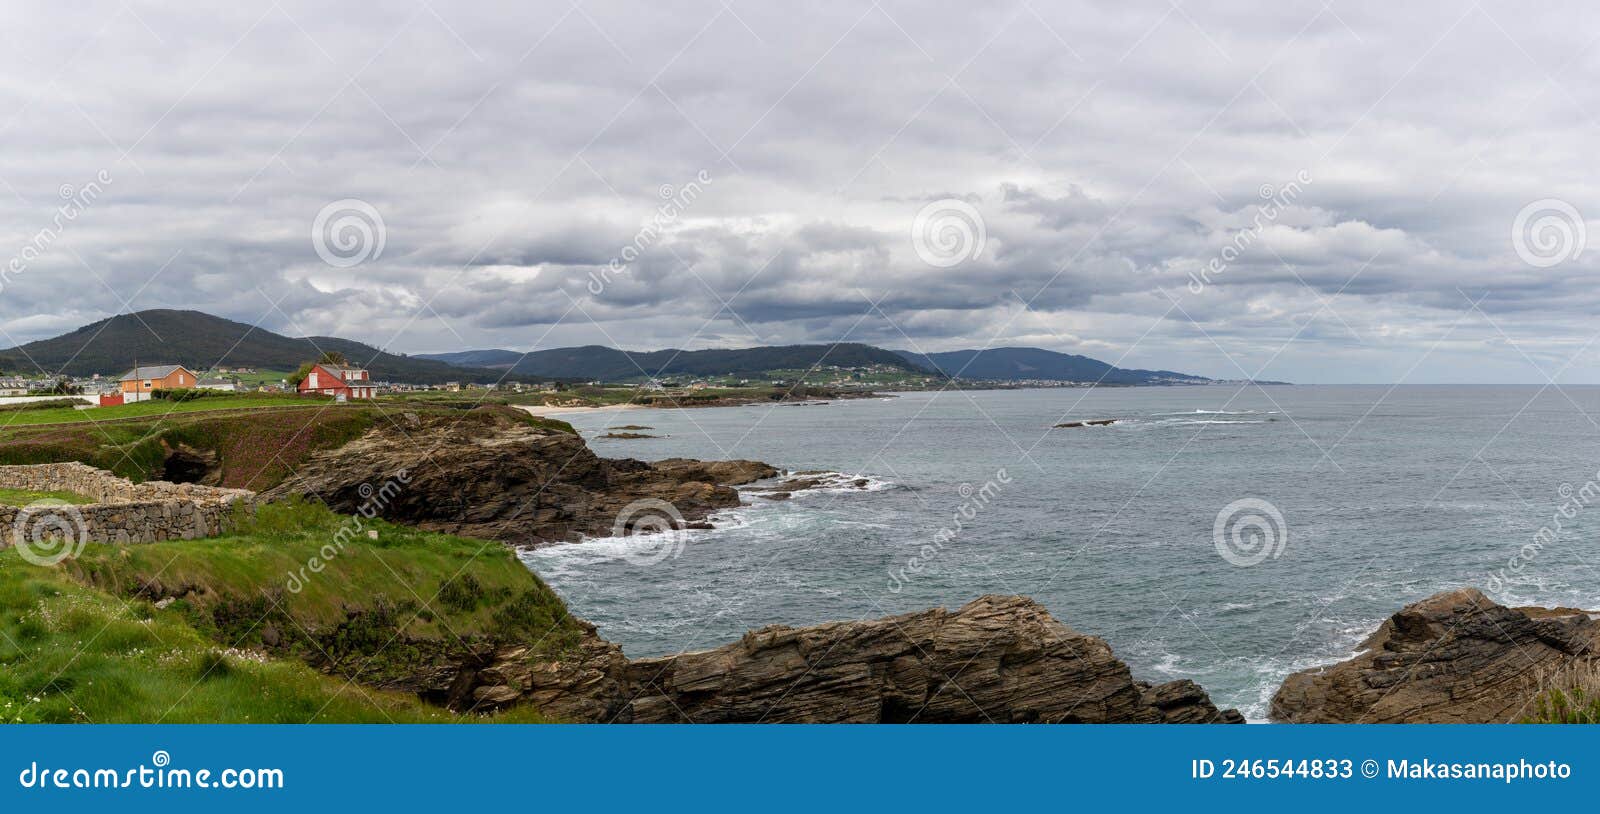 coastline in galicia near foz with green meadows and homes on the seashore